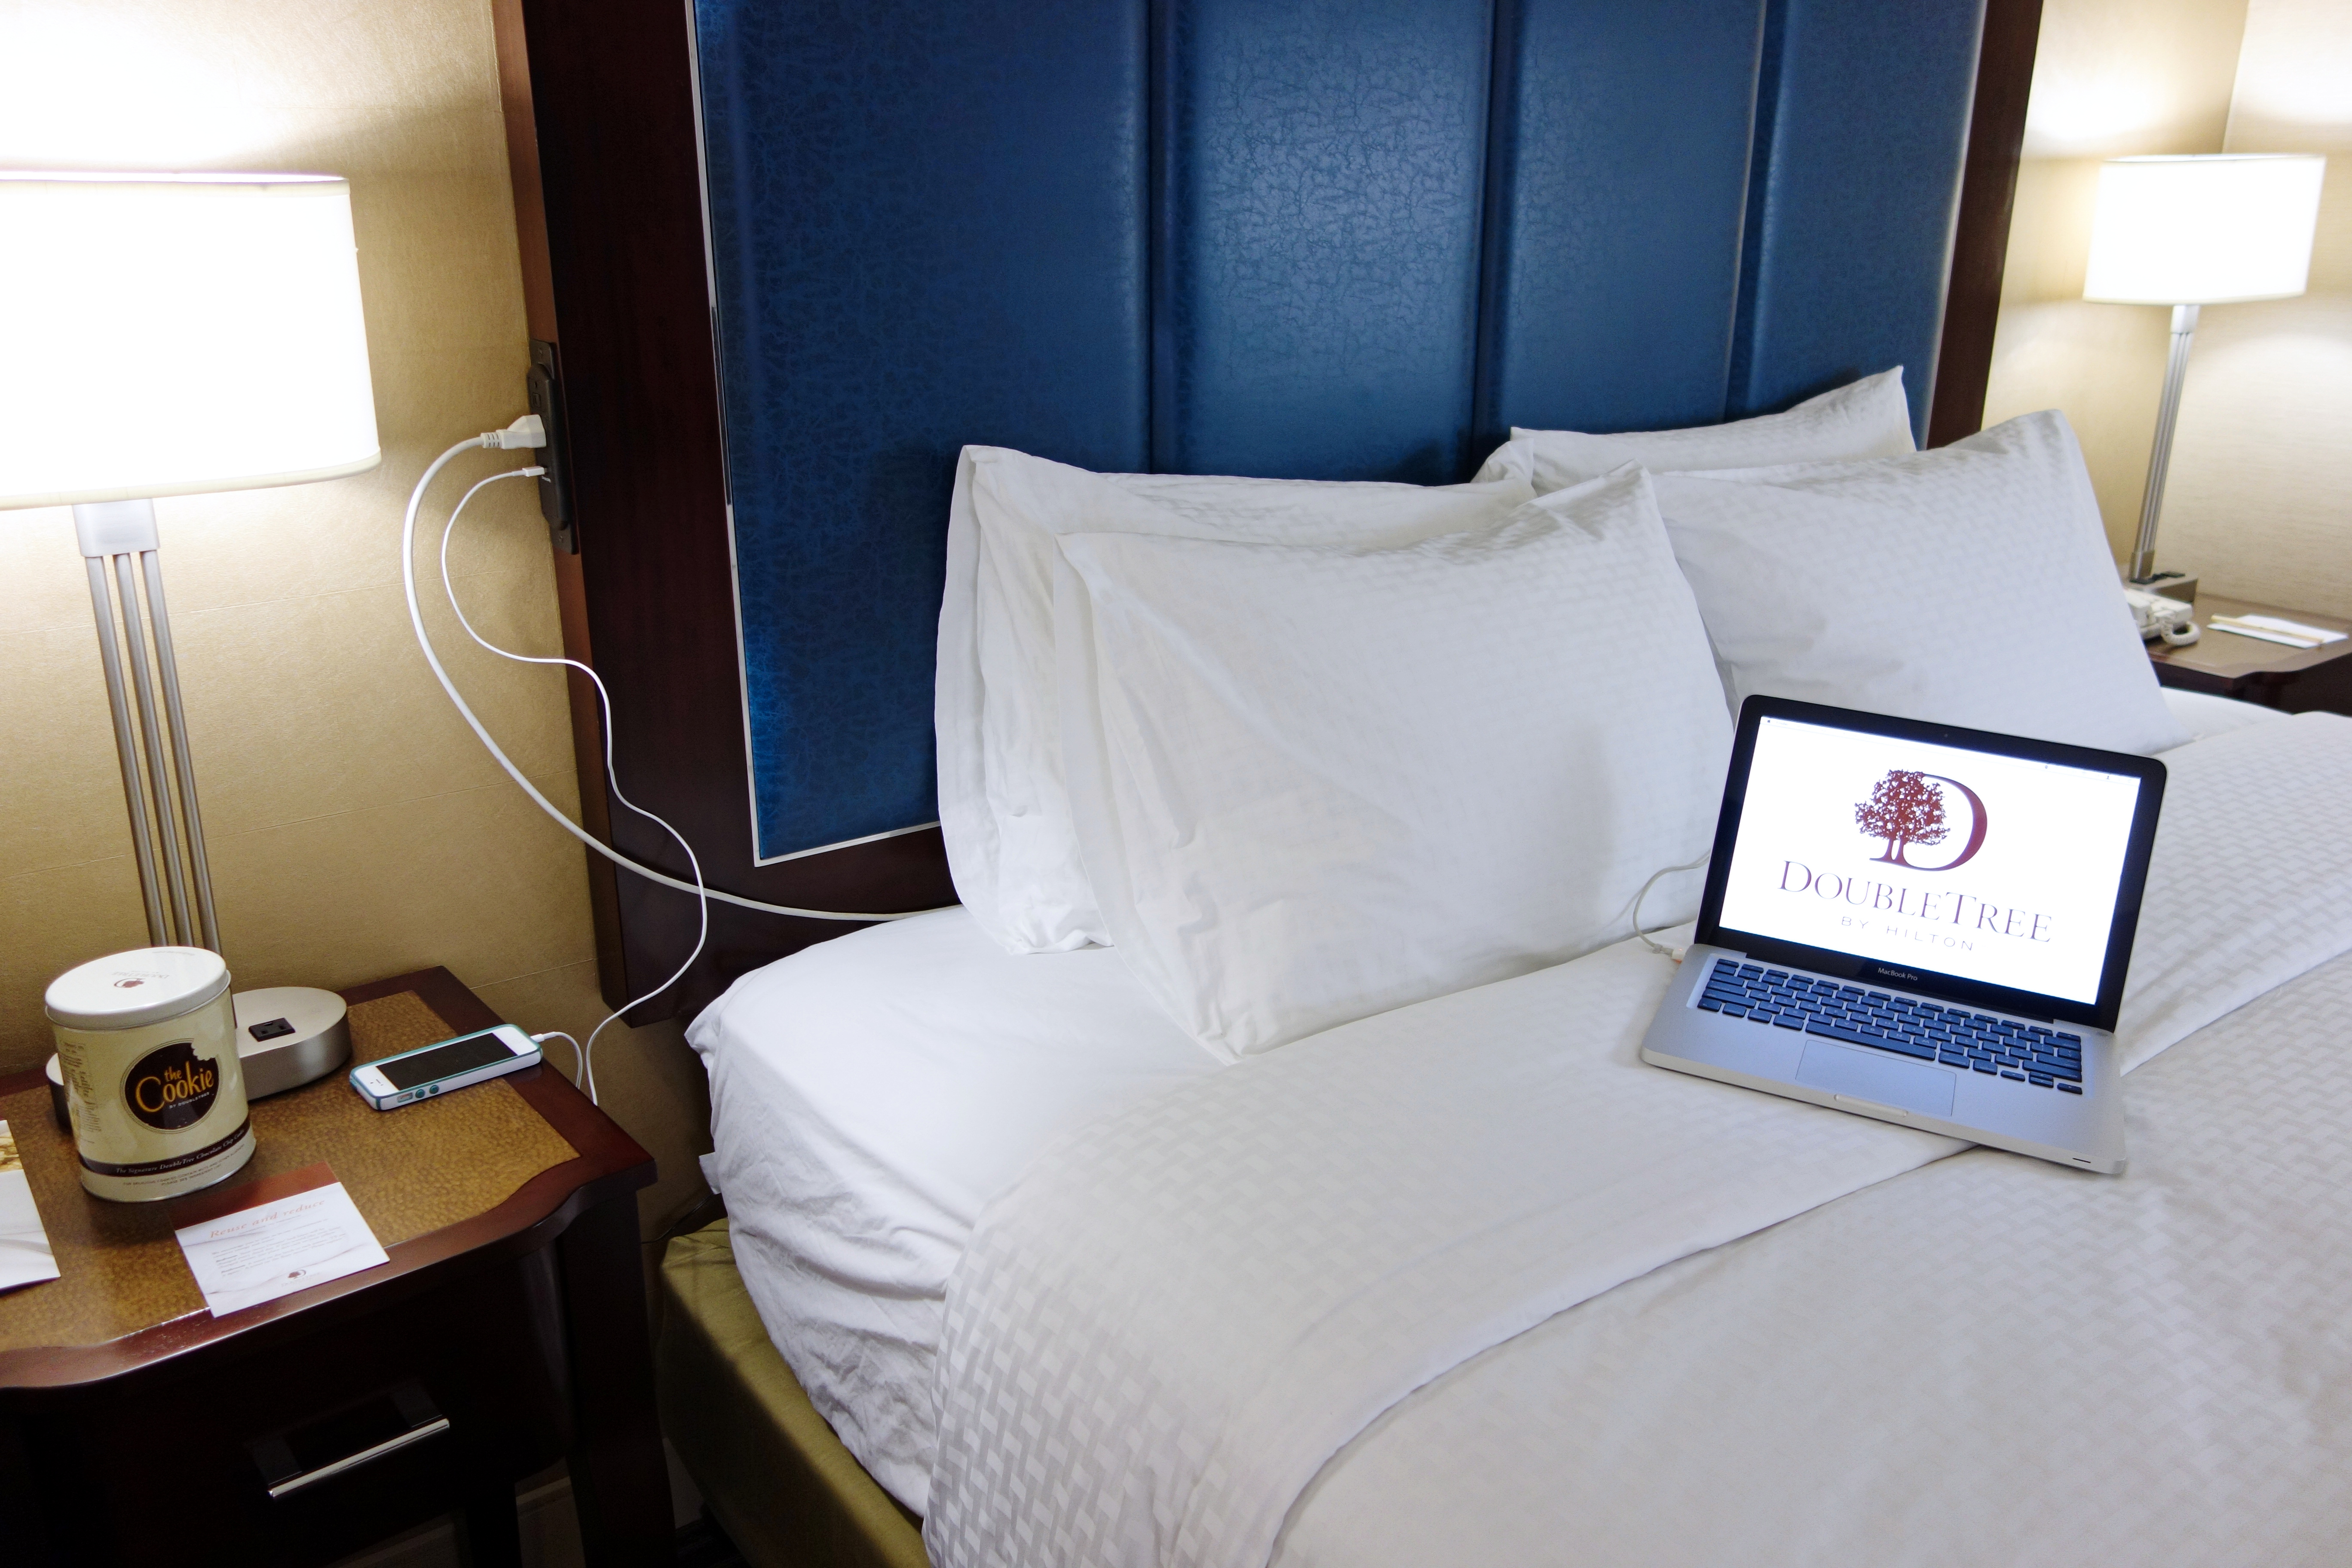 King Bed With Laptop and Phone Plugged Into Connectivity Headboard, and Bedside Tables With Illuminated Lamps